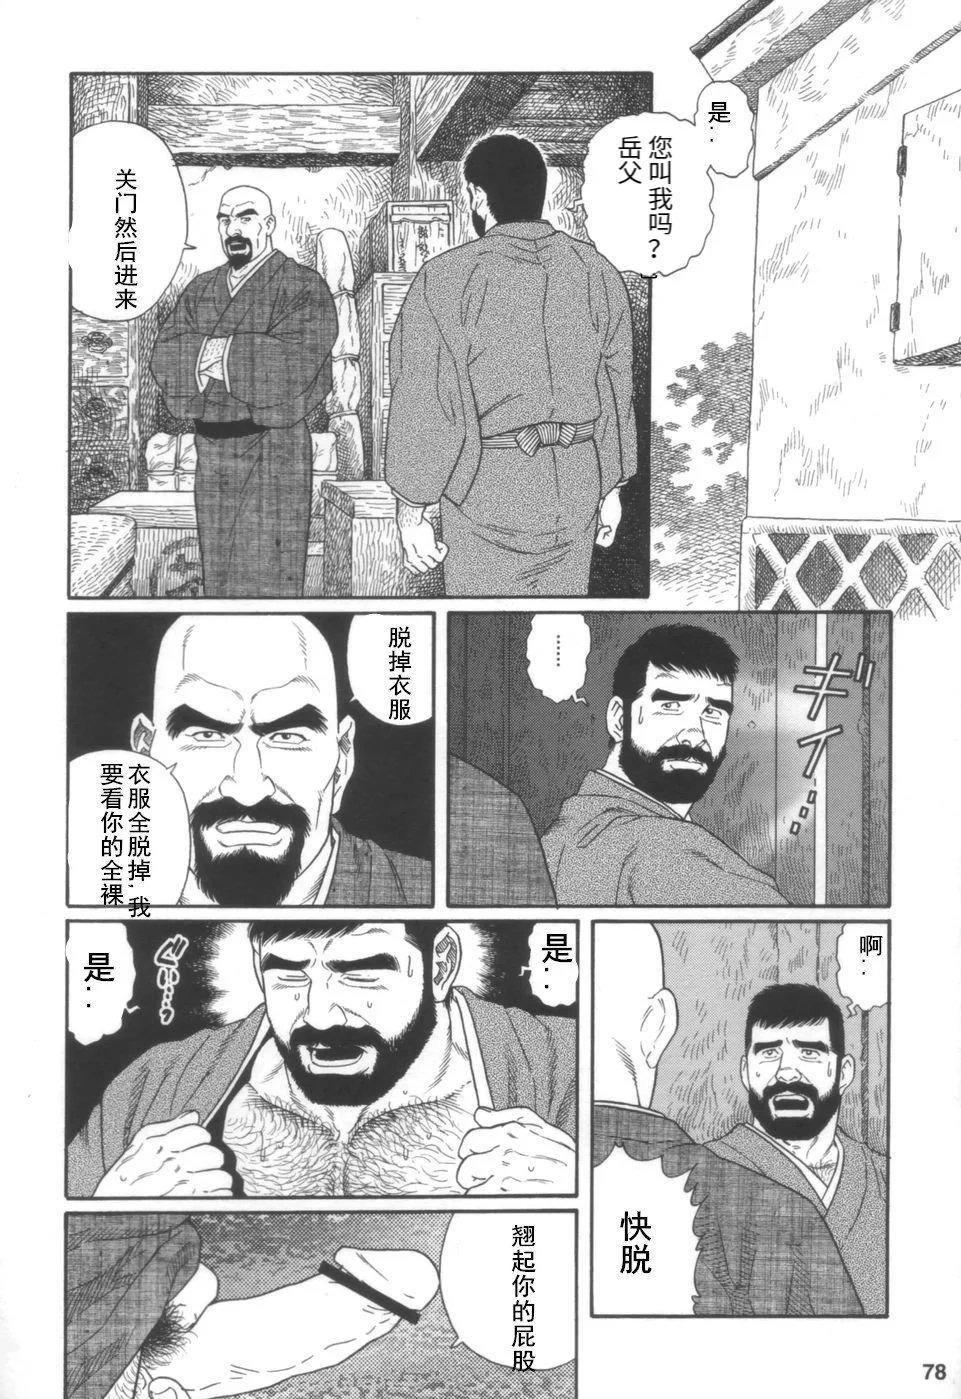 Comedor Gedou no Ie Joukan | 邪道之家 Vol. 1 Ch.3 Soapy - Page 4